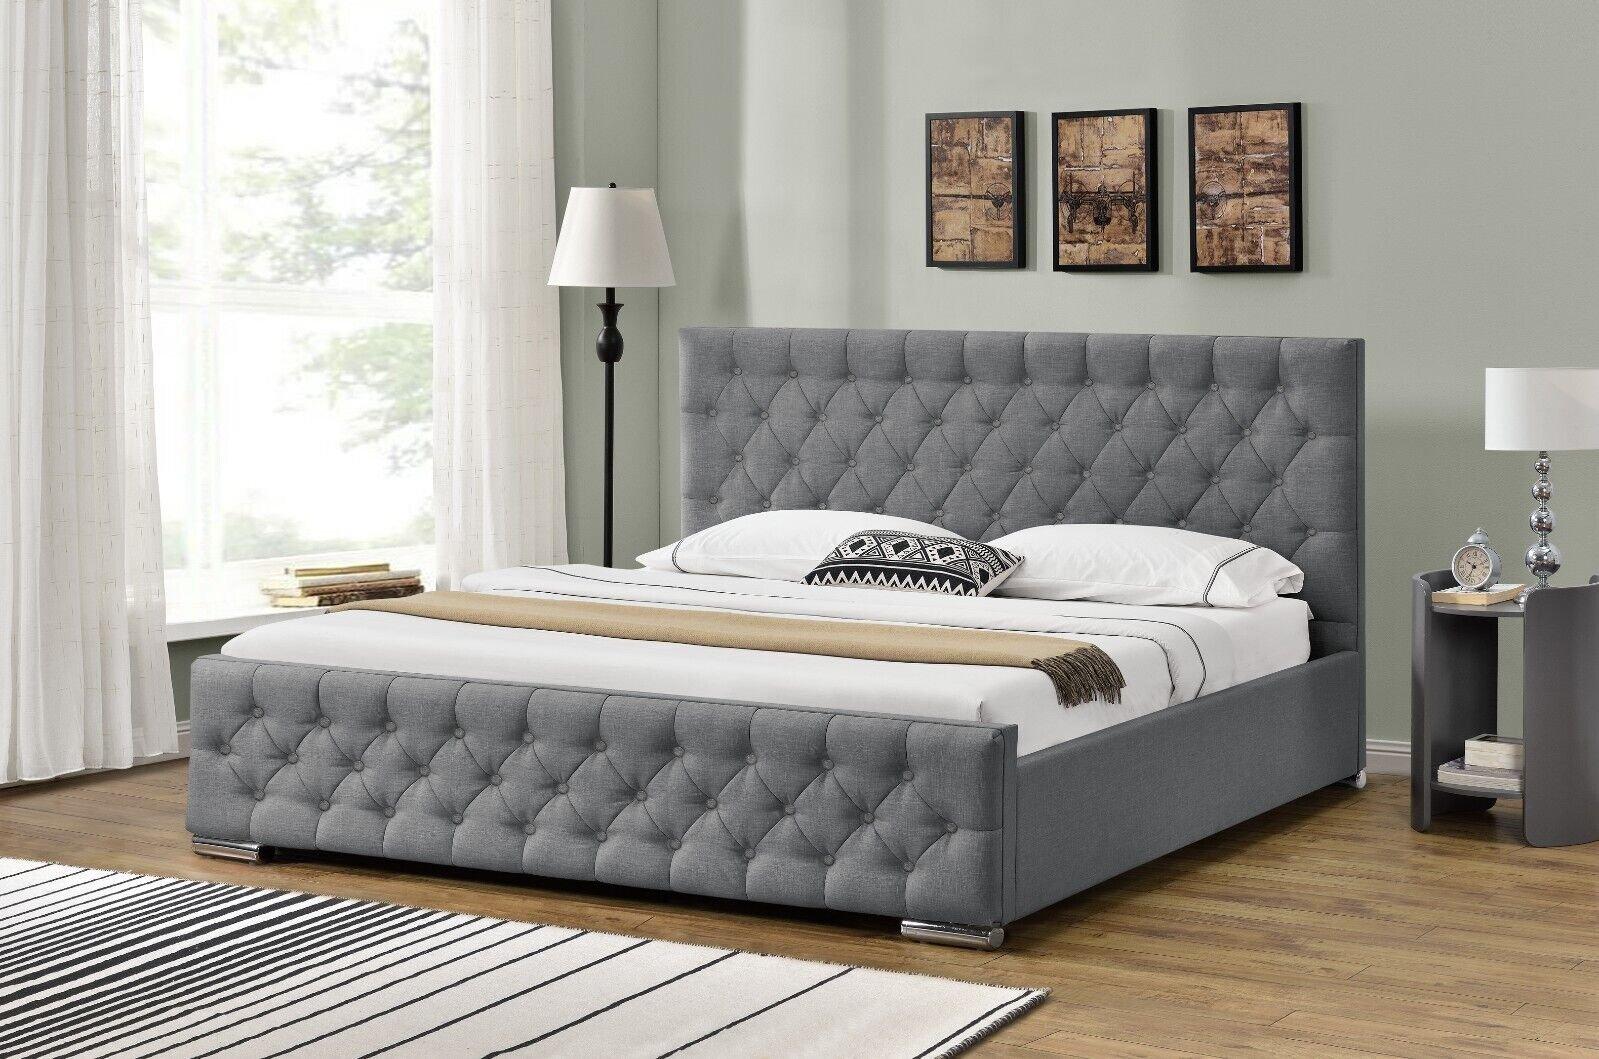 Athens Linen Dark Grey Fabric Buttoned Bed Frame With Gas Lift Ottoman Storage